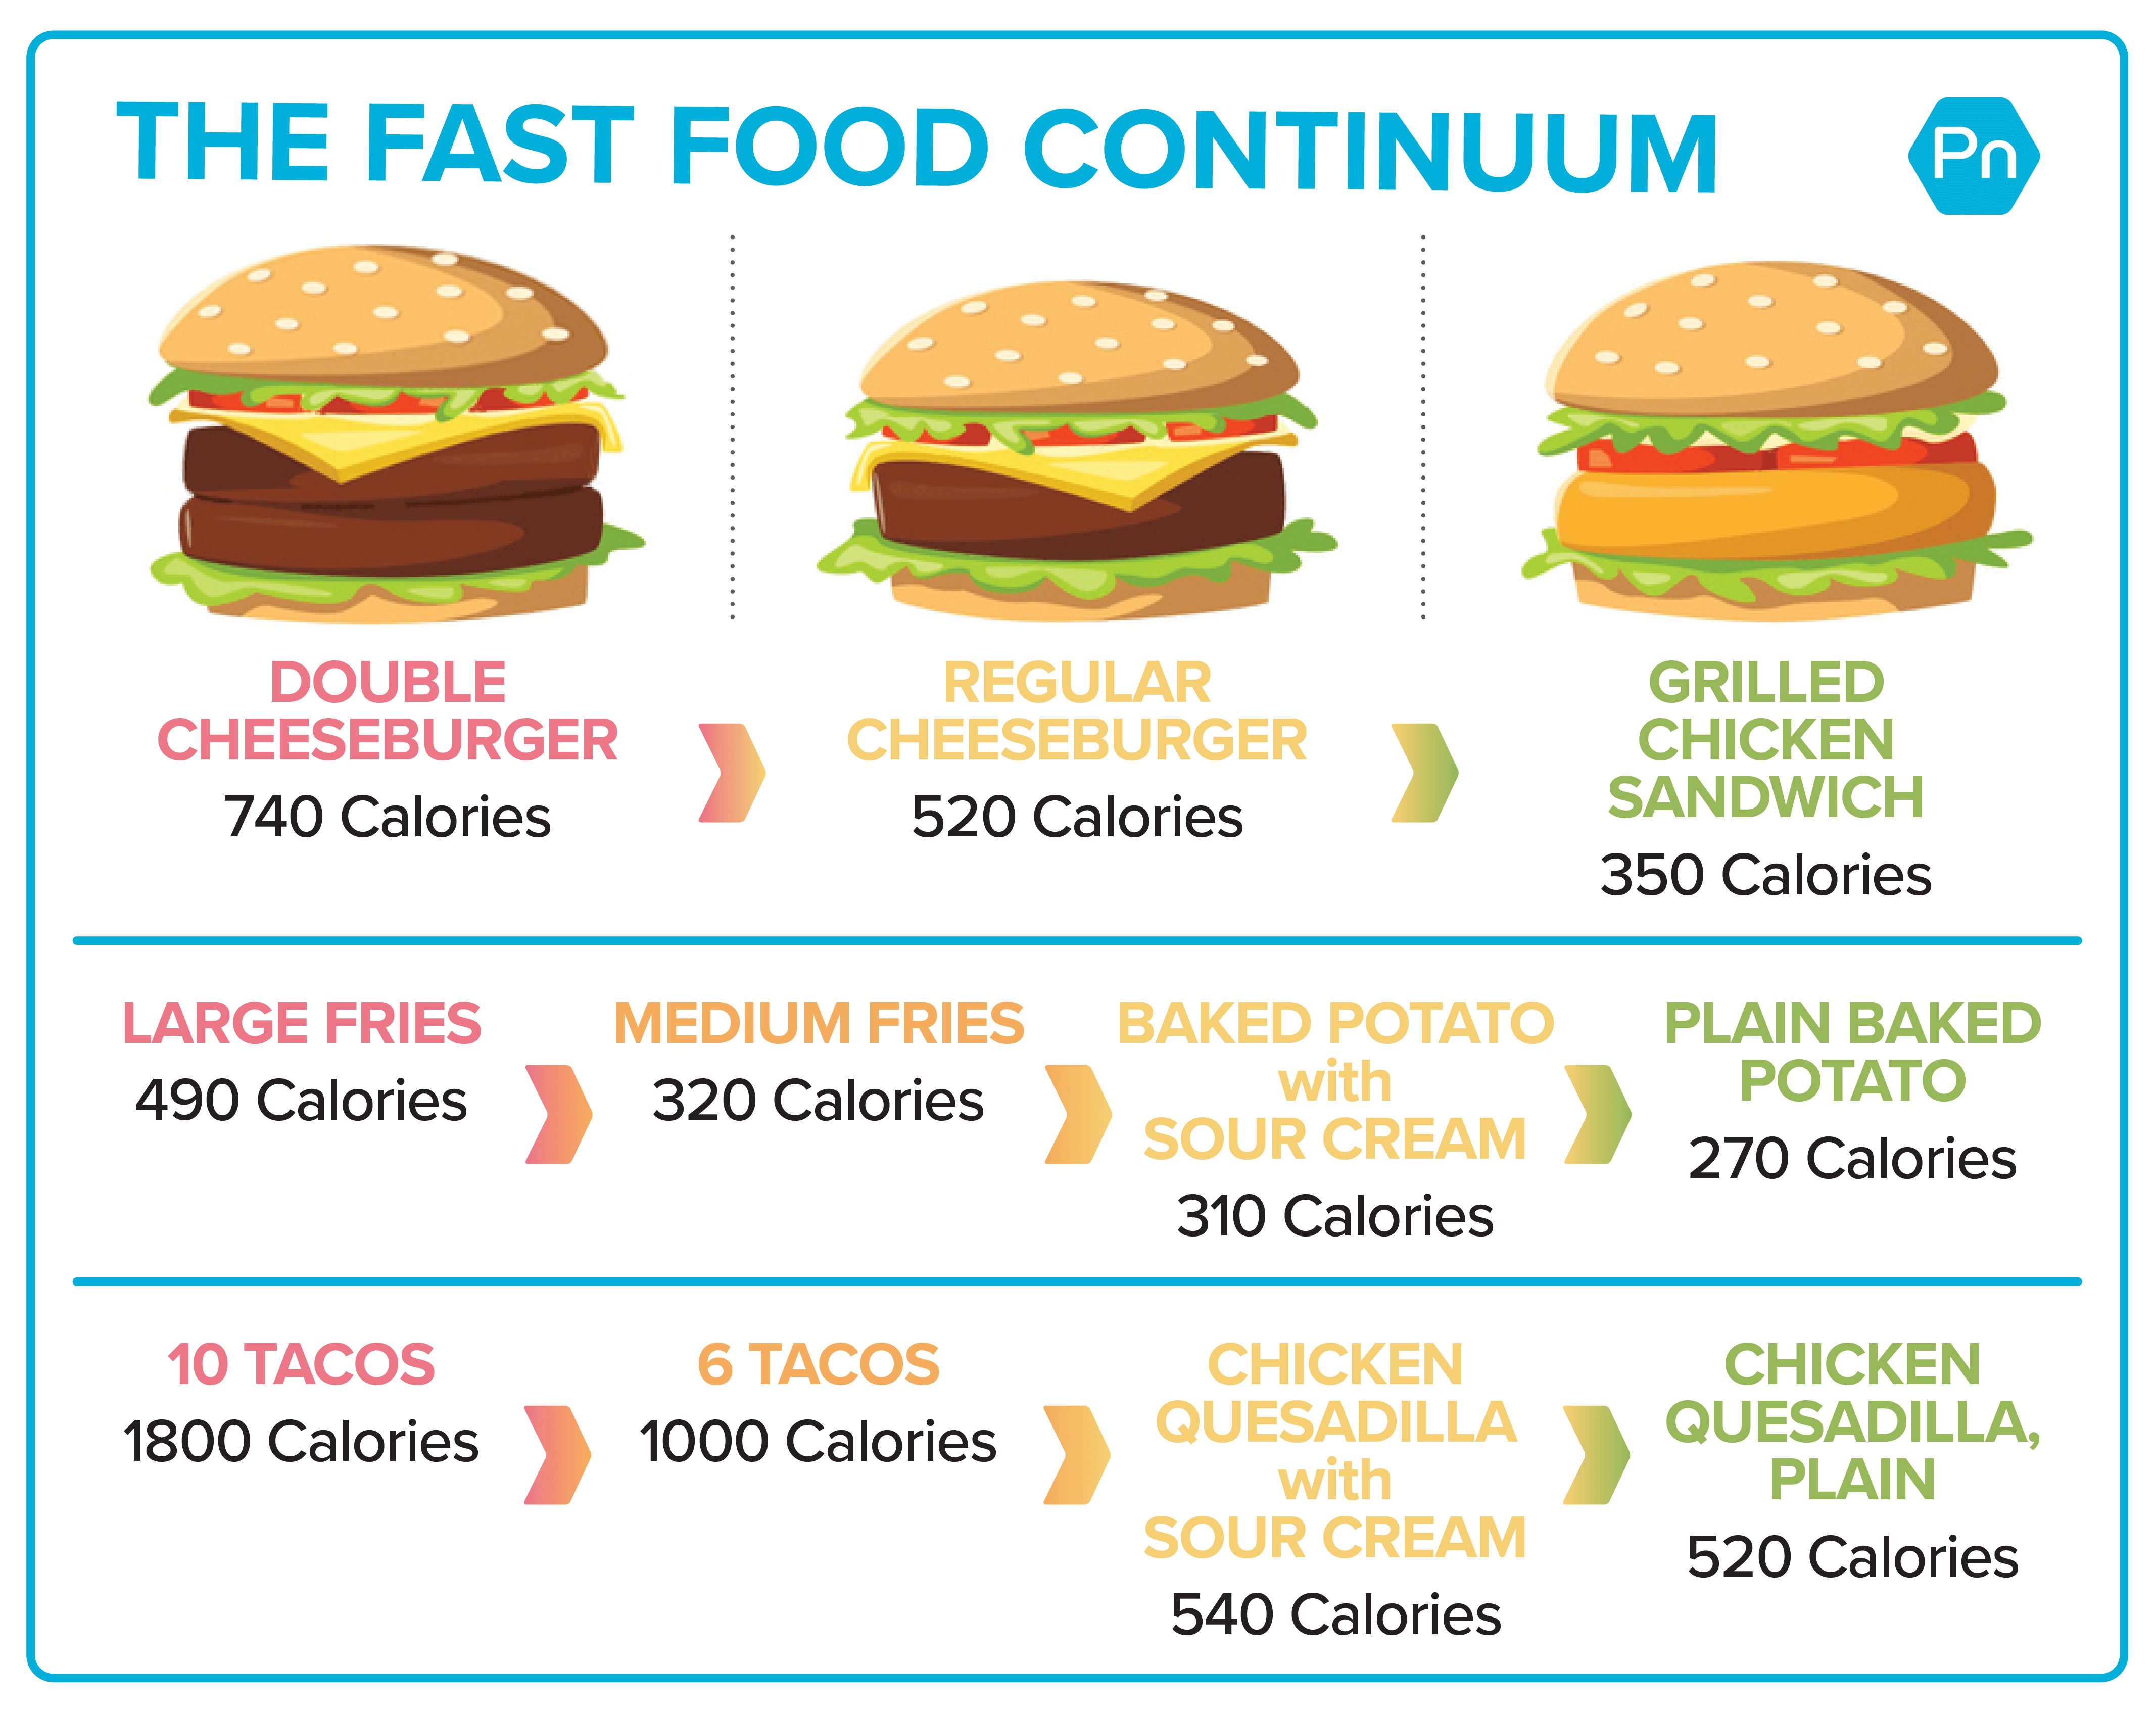 Graphical depiction of several fast food options: Double cheeseburger (740 Calories), regular cheeseburger (520 Calories), grilled chicken sandwich (350 Calories), large fries (490 Calories), medium fries (320 Calories), baked potato with sour cream (310 Calories), baked potato without sour cream (270 Calories), 10 tacos (1800 Calories), 6 tacos (1000 Calories), chicken quesadilla with sour cream (540 Calories), chicken quesadilla plain (520 Calories). 